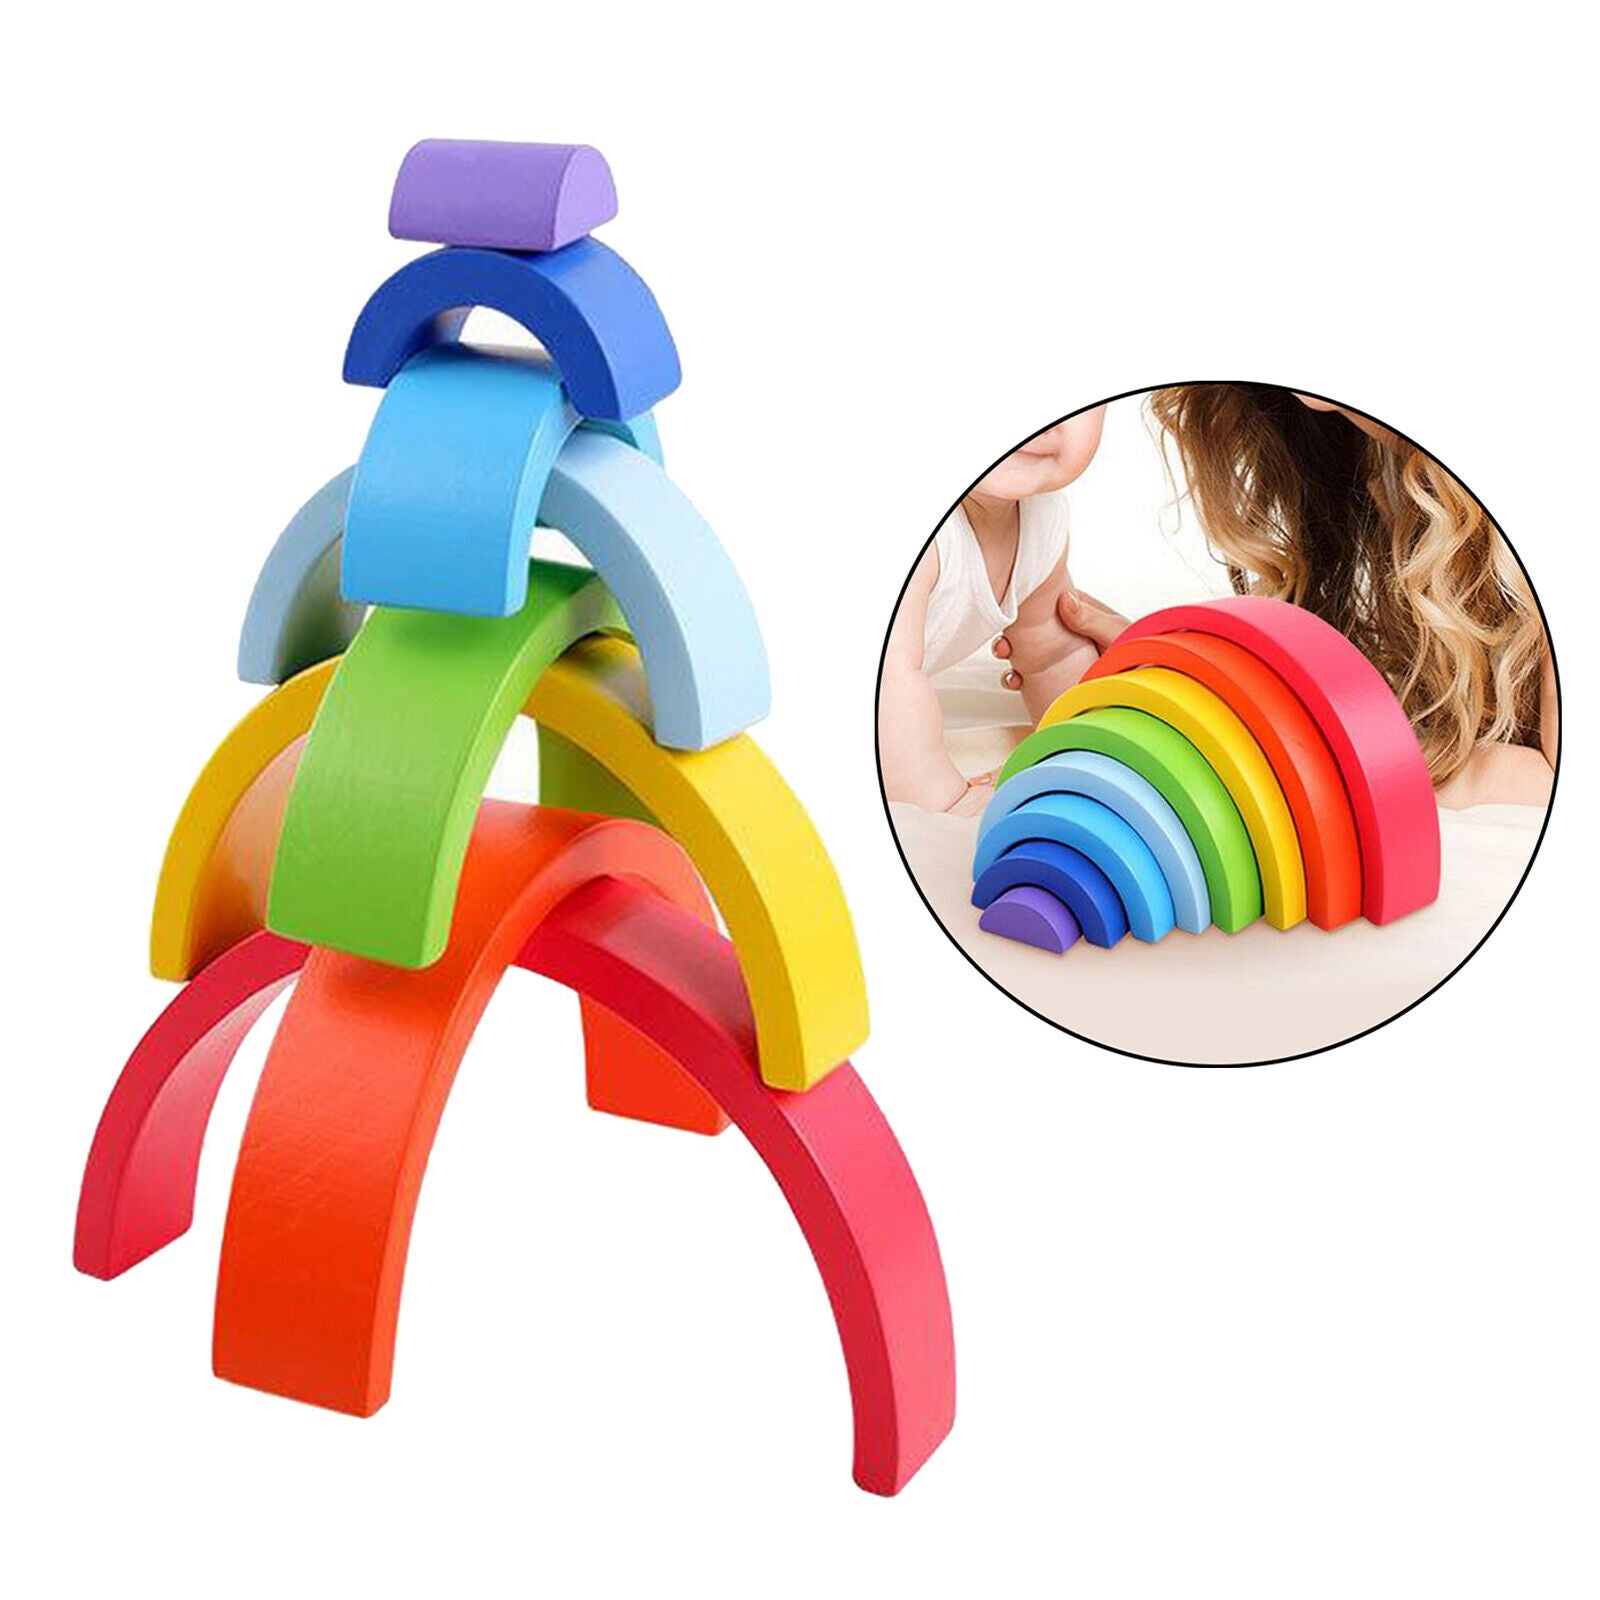 8pcs Rainbow Arched Building Stacking Blocks DIY Puzzle Handcrafted Toys Fun